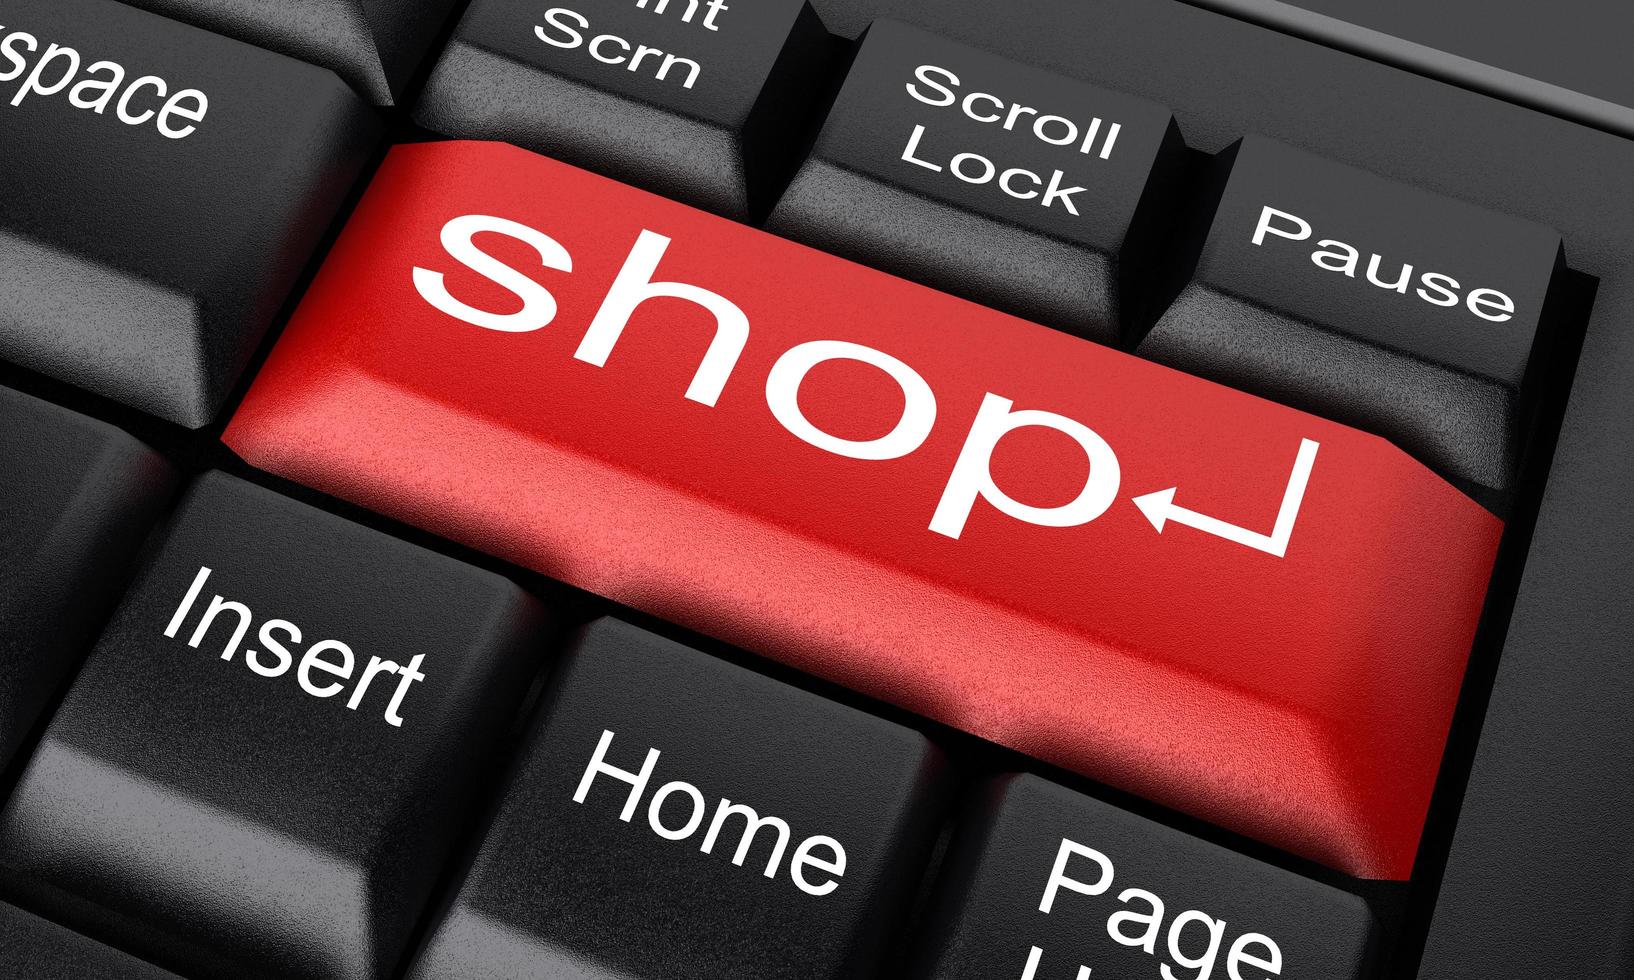 shop word on red keyboard button photo